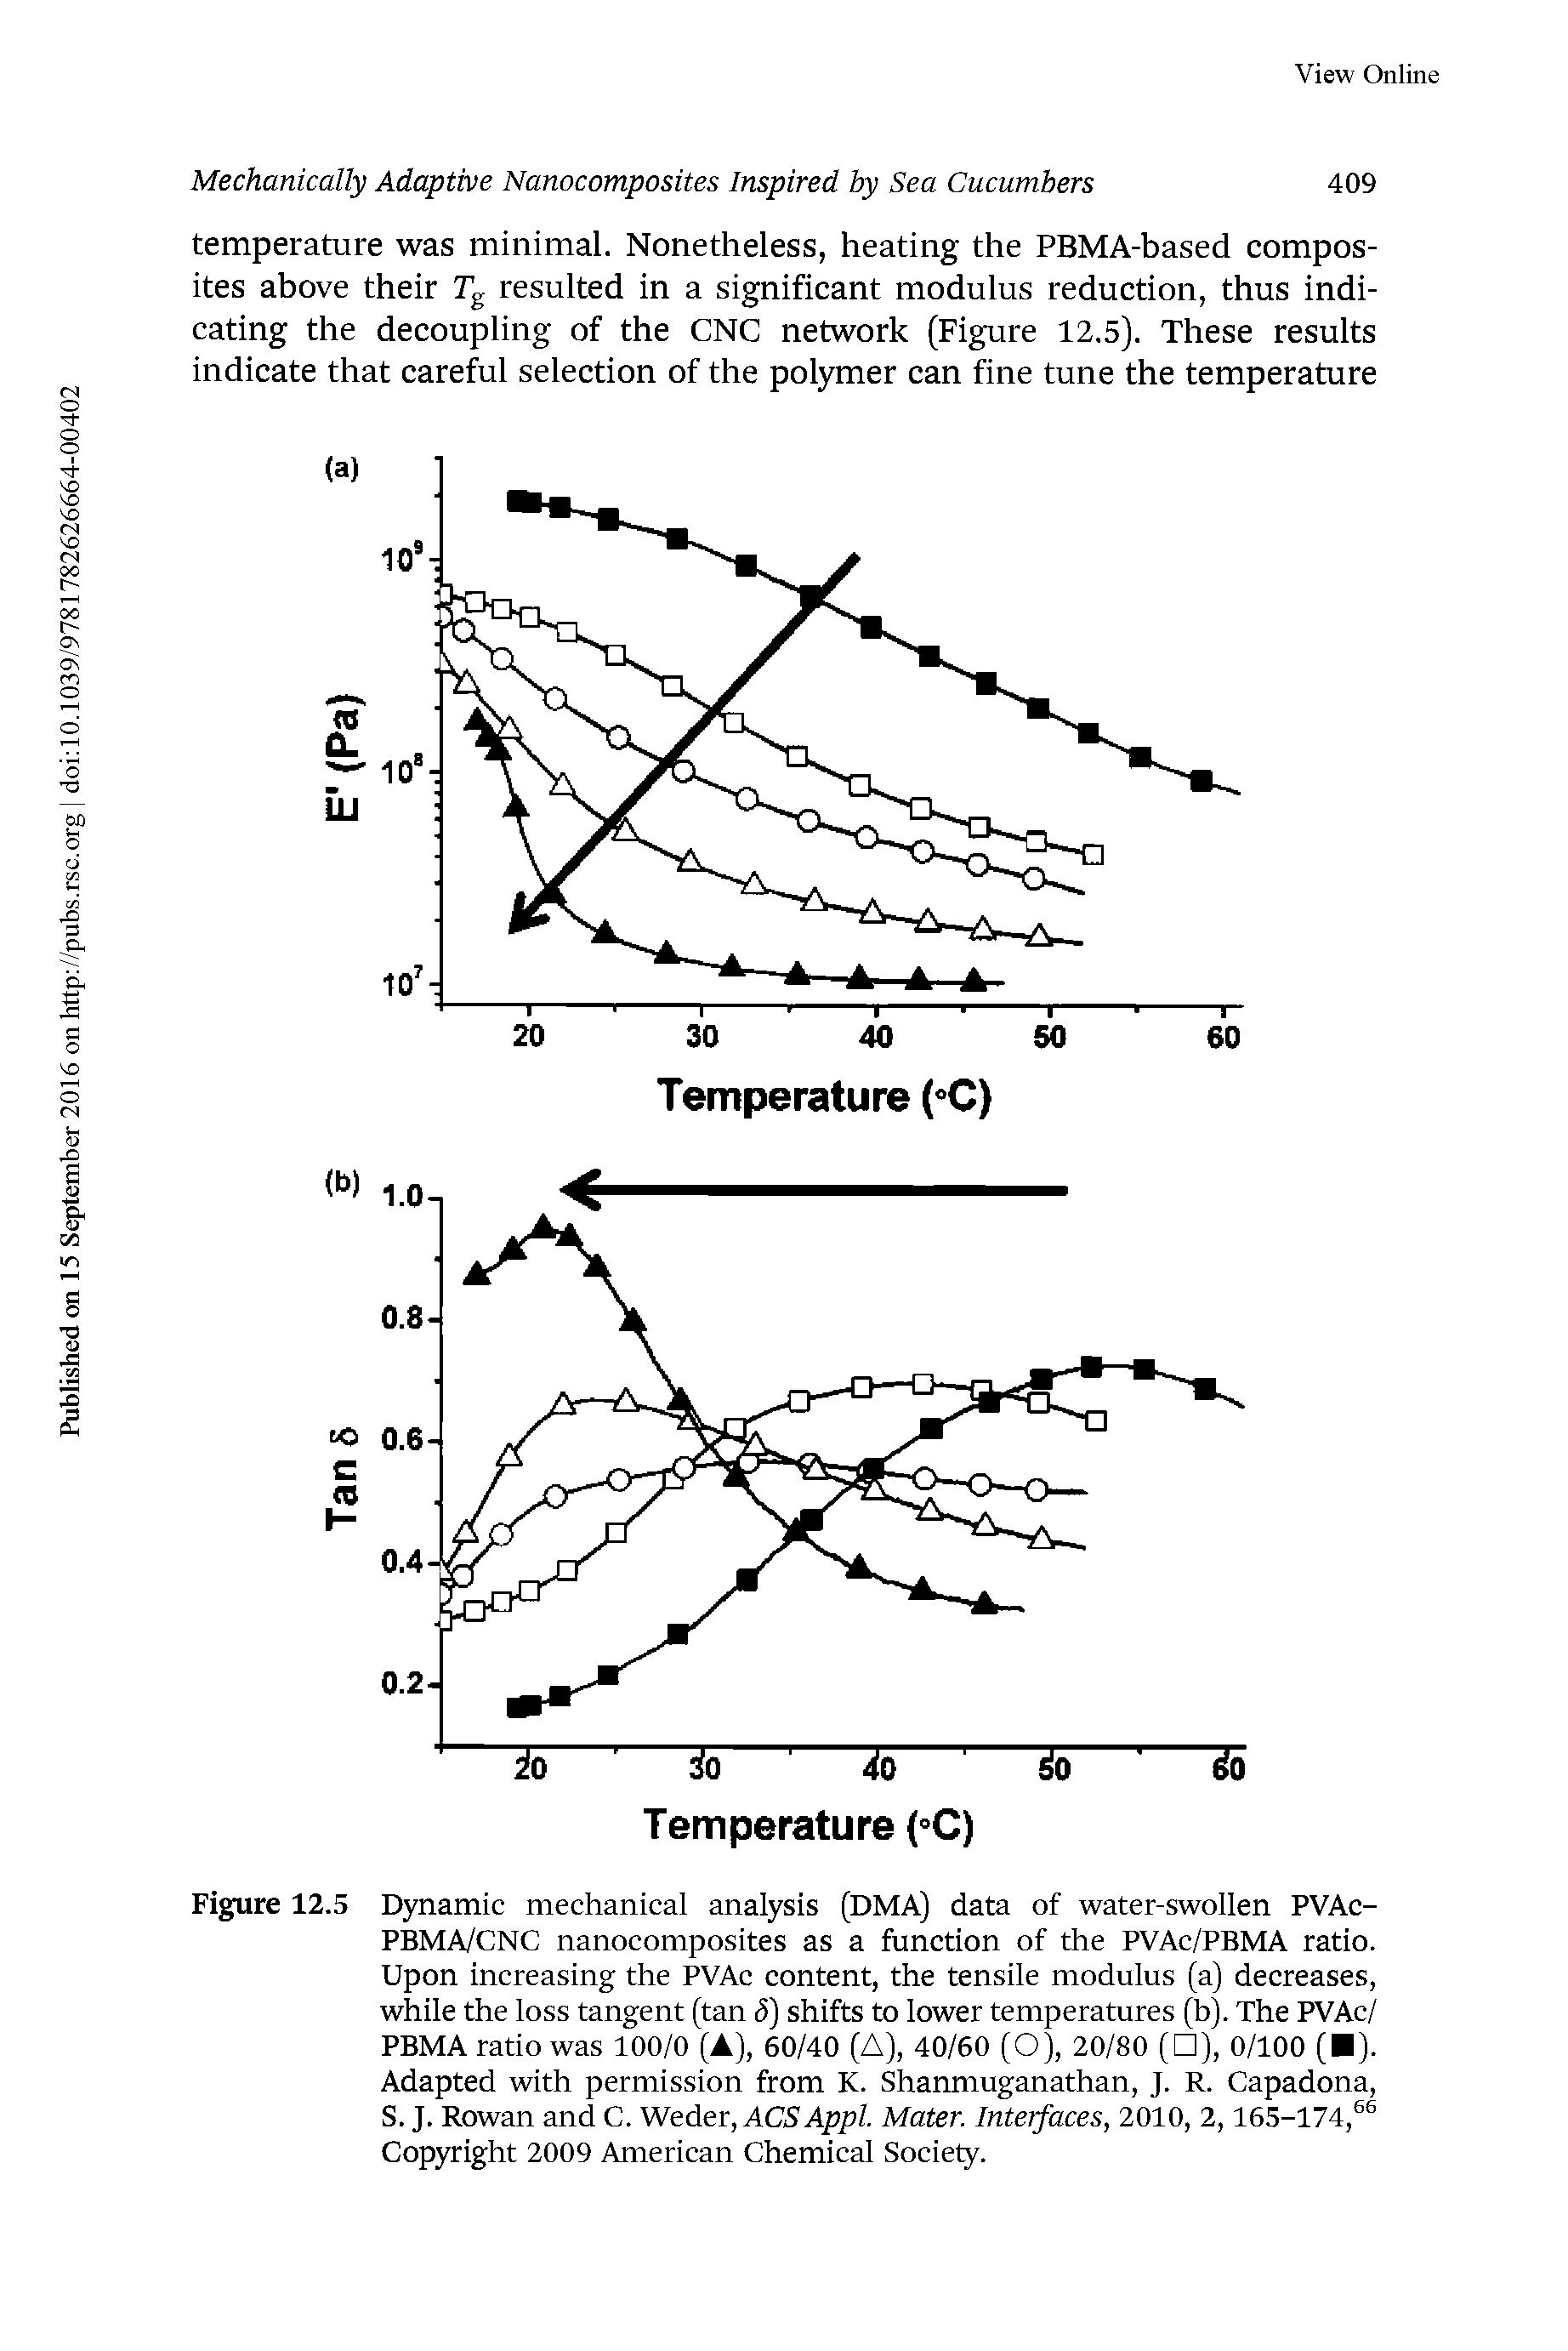 Figure 12.5 D3Tiamic mechanical analysis (DMA) data of water-swollen PVAc-PBMA/CNC nanocomposites as a function of the PVAc/PBMA ratio. Upon increasing the PVAc content, the tensile modulus (a) decreases, while the loss tangent (tan 5) shifts to lower temperatures (h). The PVAc/ PBMA ratio was 100/0 (A), 60/40 (A), 40/60 (O), 20/80 ( ), 0/100 ( ). Adapted with permission from K. Shanmuganathan, J. R. Capadona, S. J. Rowan and C. WeAer,ACSAppl. Mater. Interfaces, 2010, 2,165-174, Copyright 2009 American Chemical Society.